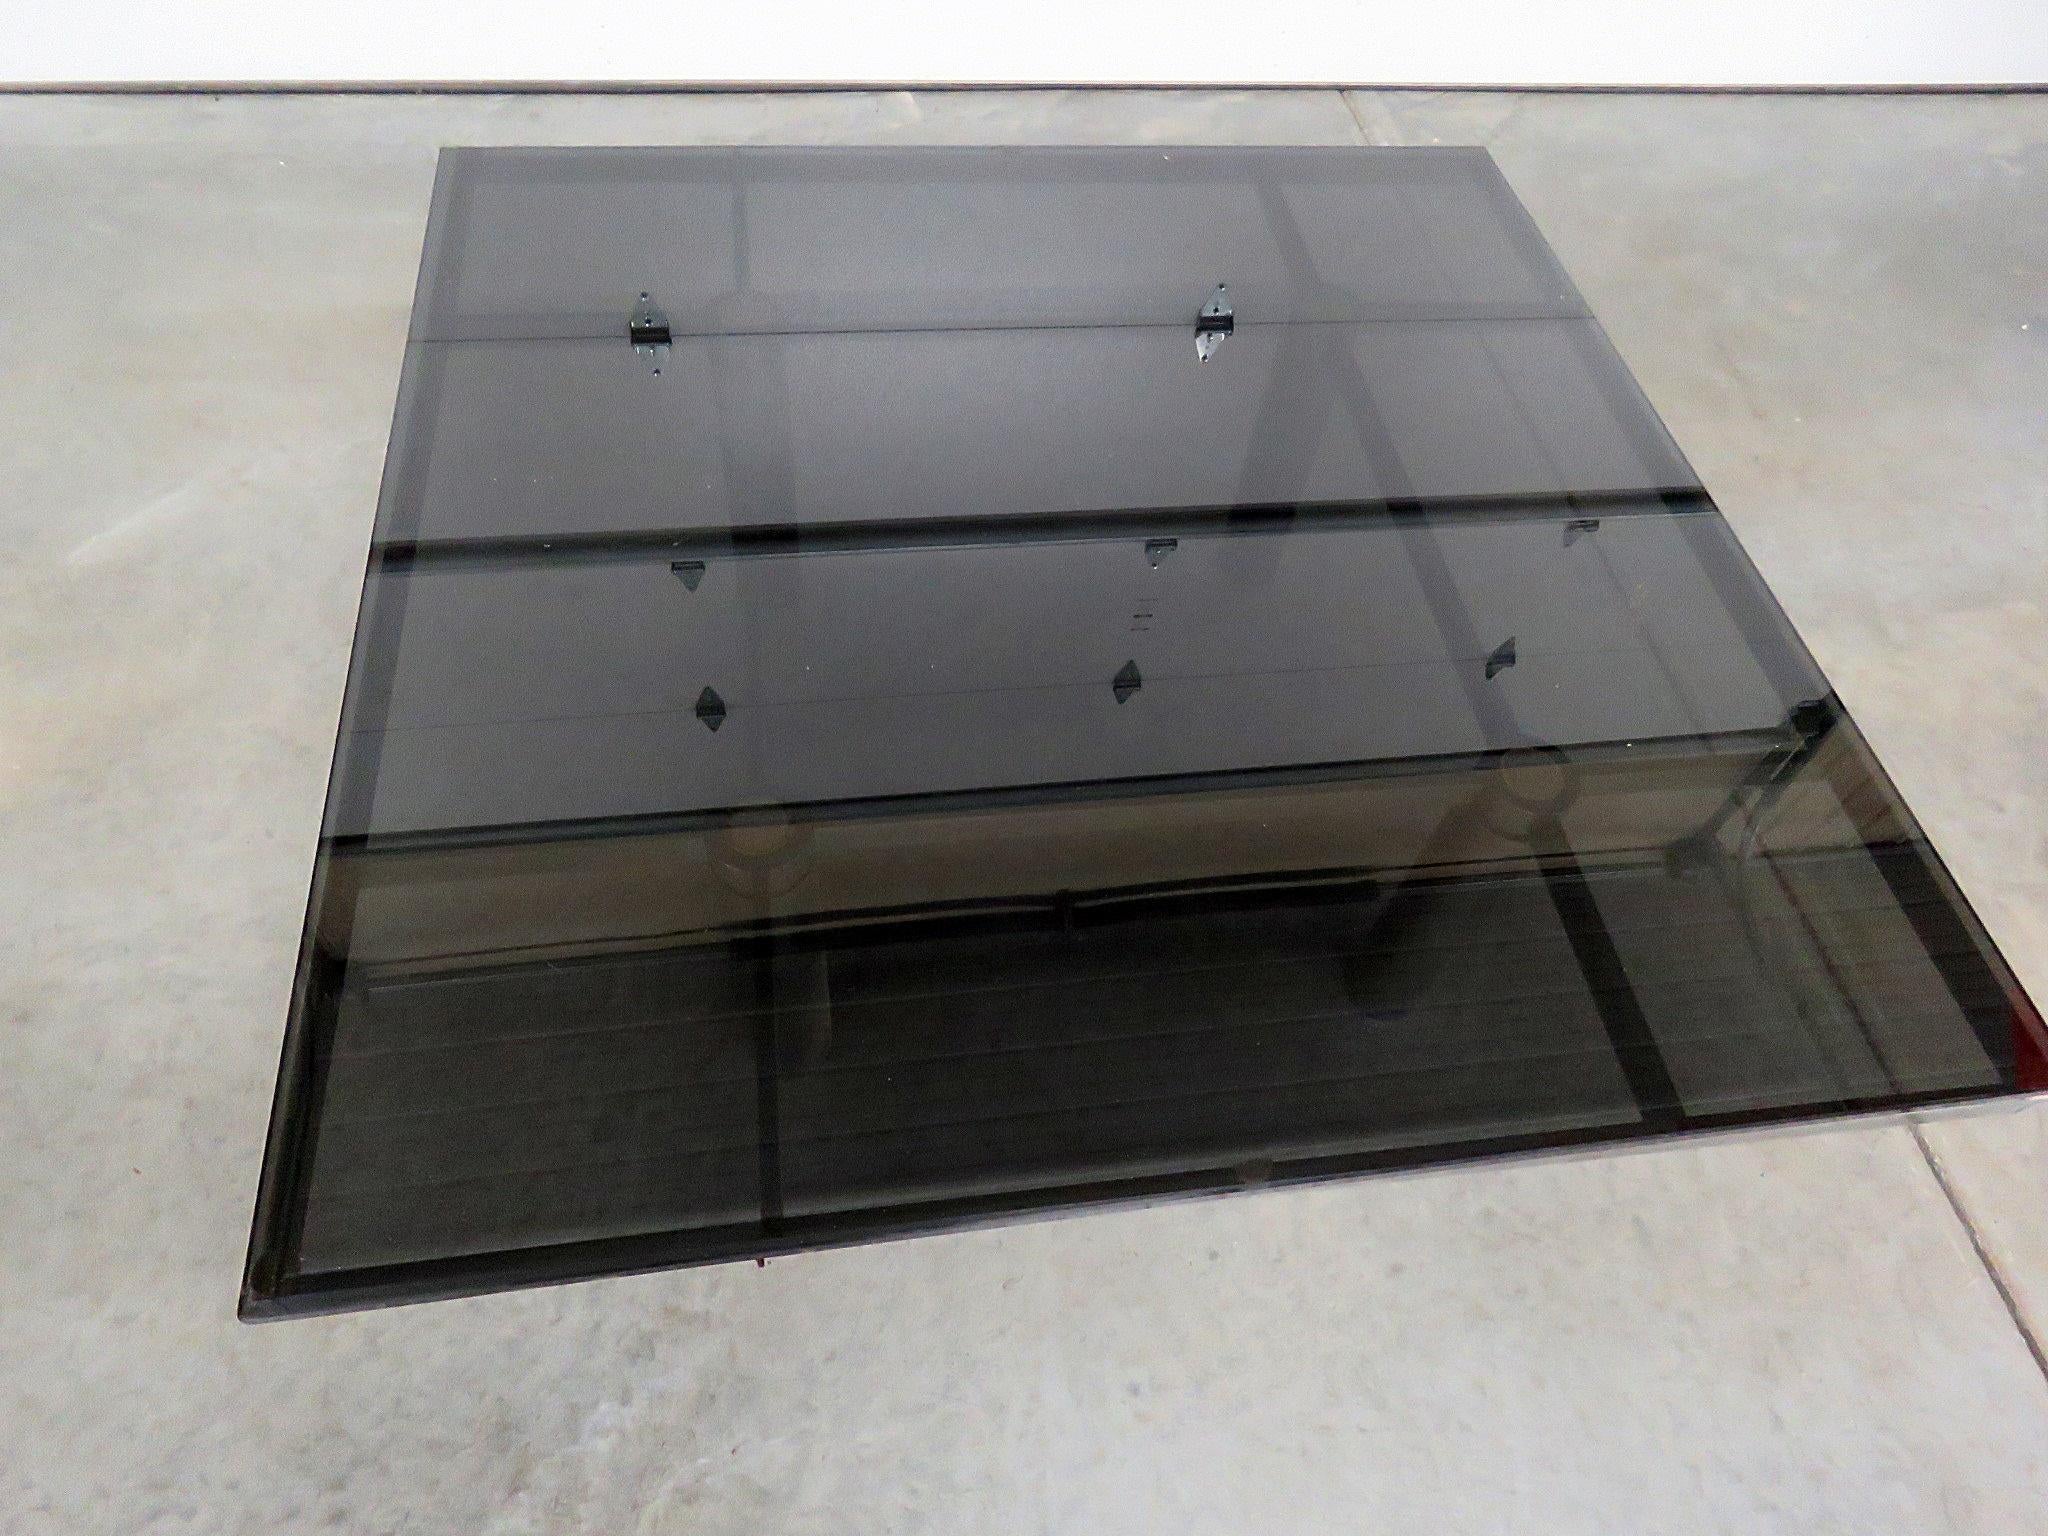 Mid-Century Modern Industrial style steel based coffee table with a smoked glass top.